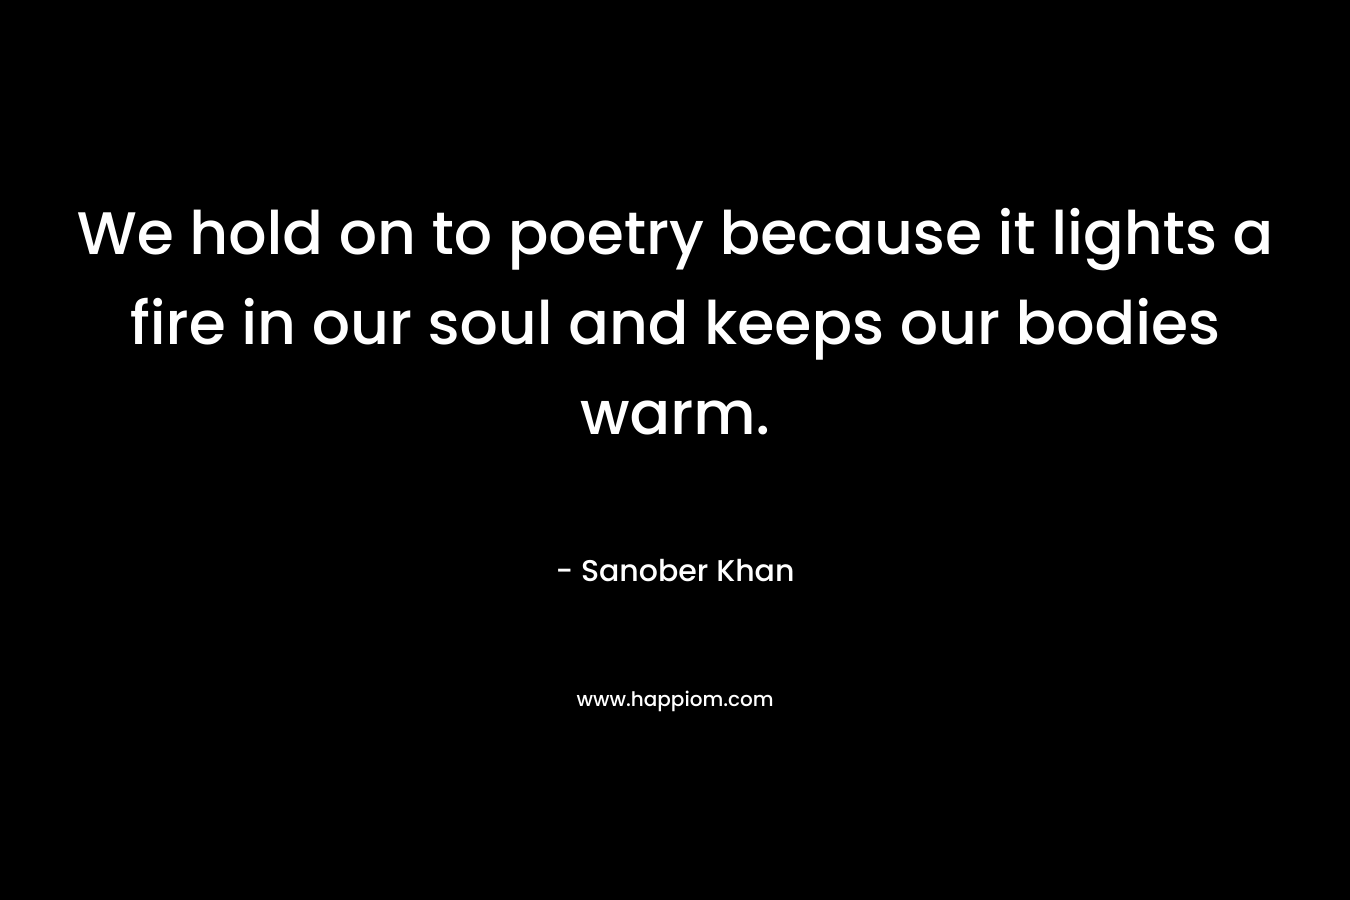 We hold on to poetry because it lights a fire in our soul and keeps our bodies warm.